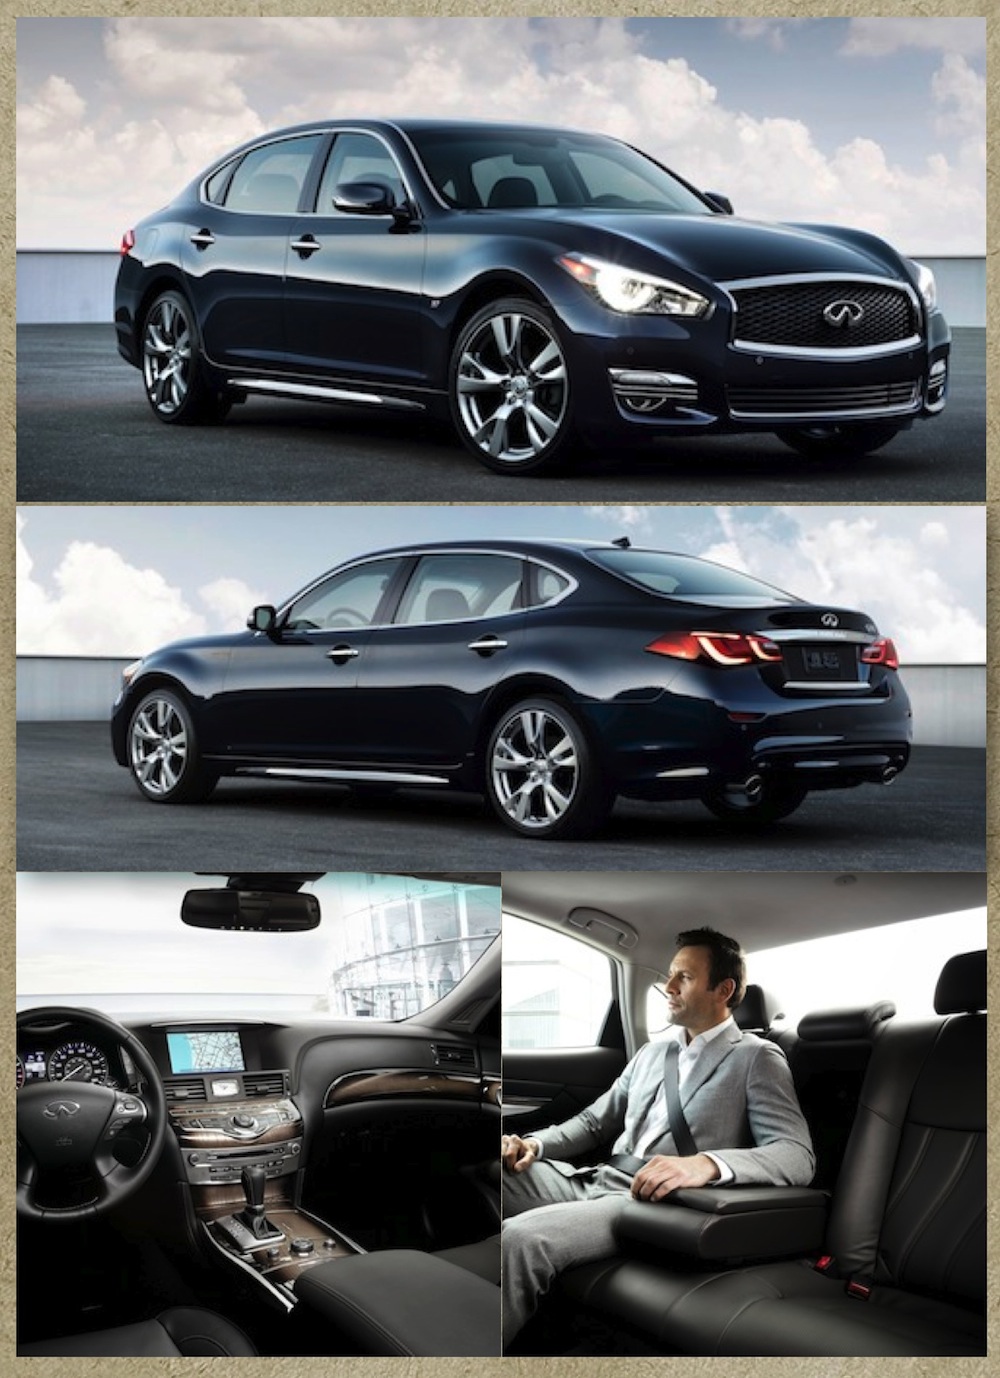 2015 Infiniti Q70: Refreshed and Extended – Auto Trends Magazine